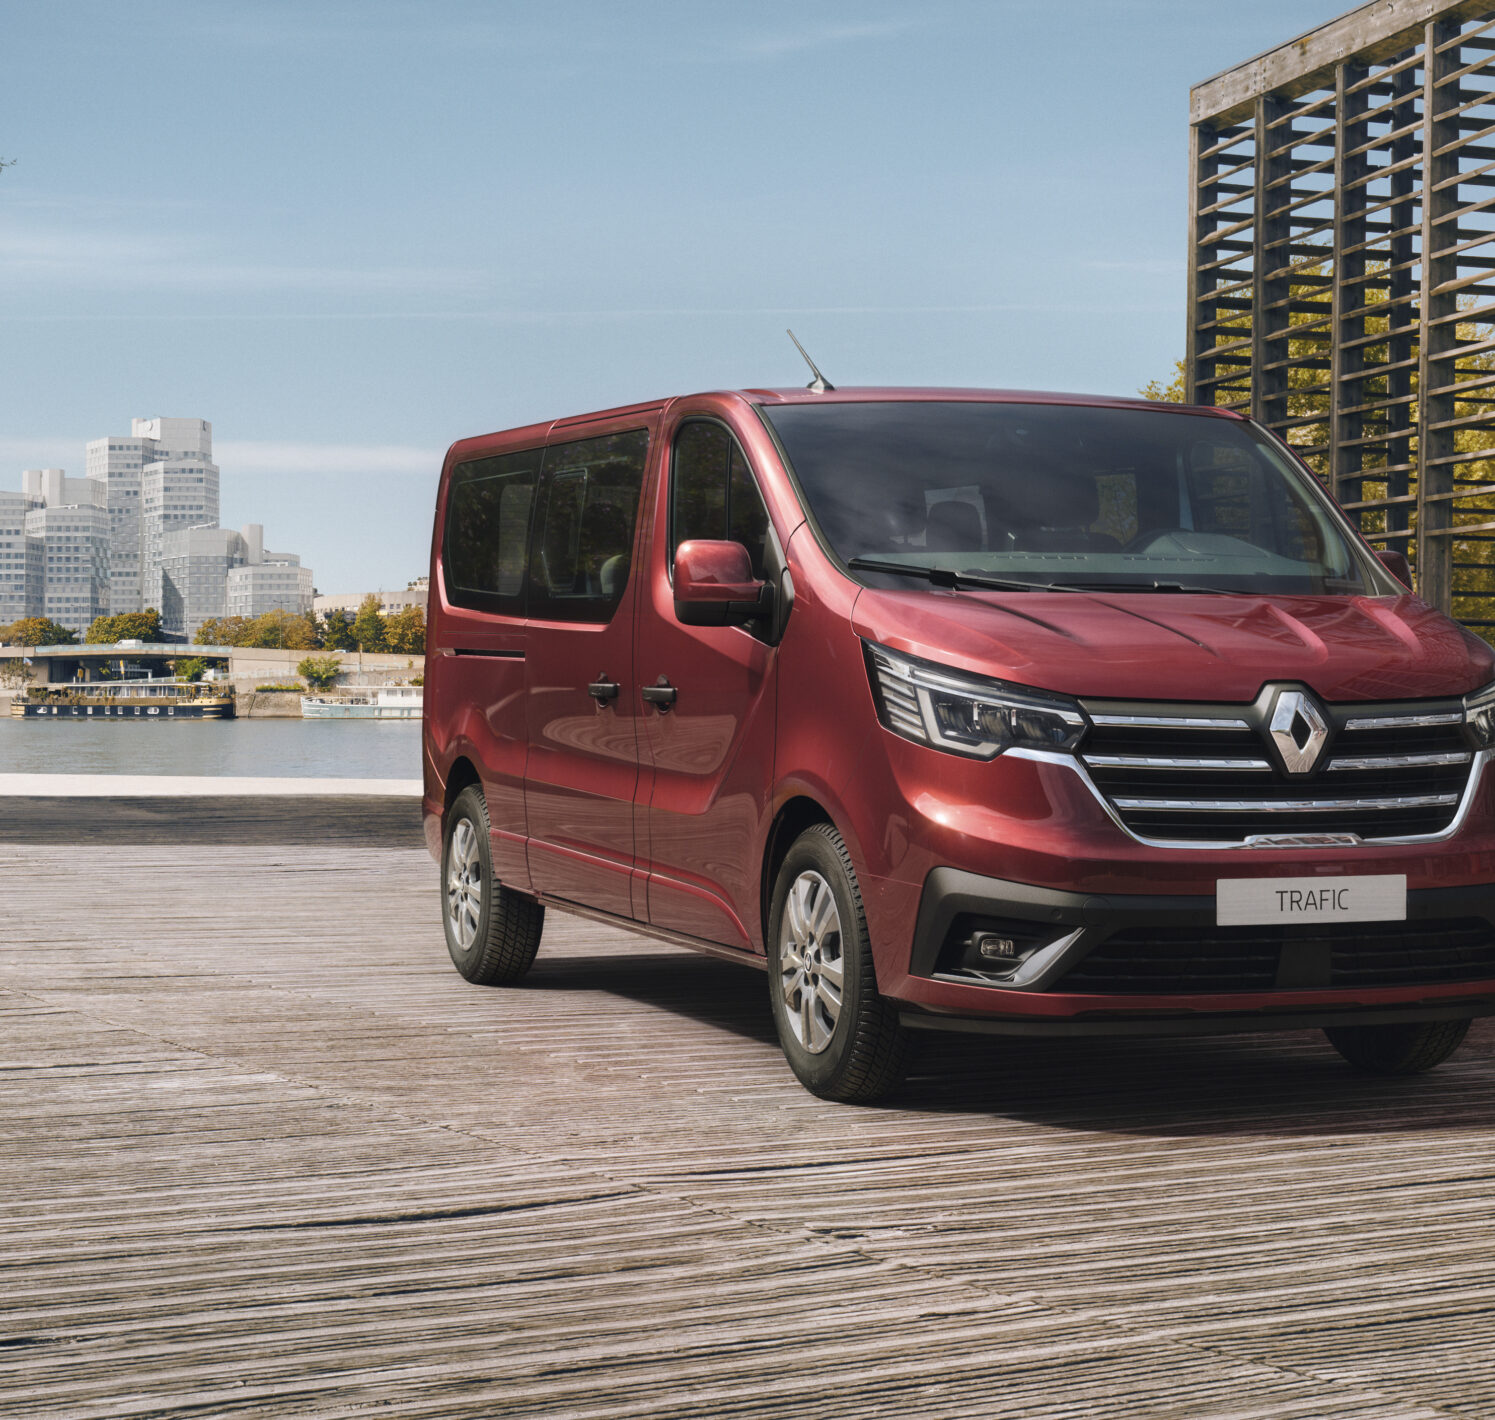 https://autofilter.sk/assets/images/trafic-combi/gallery/2020-New-Renault-Trafic-Combi.jpg - obrazok